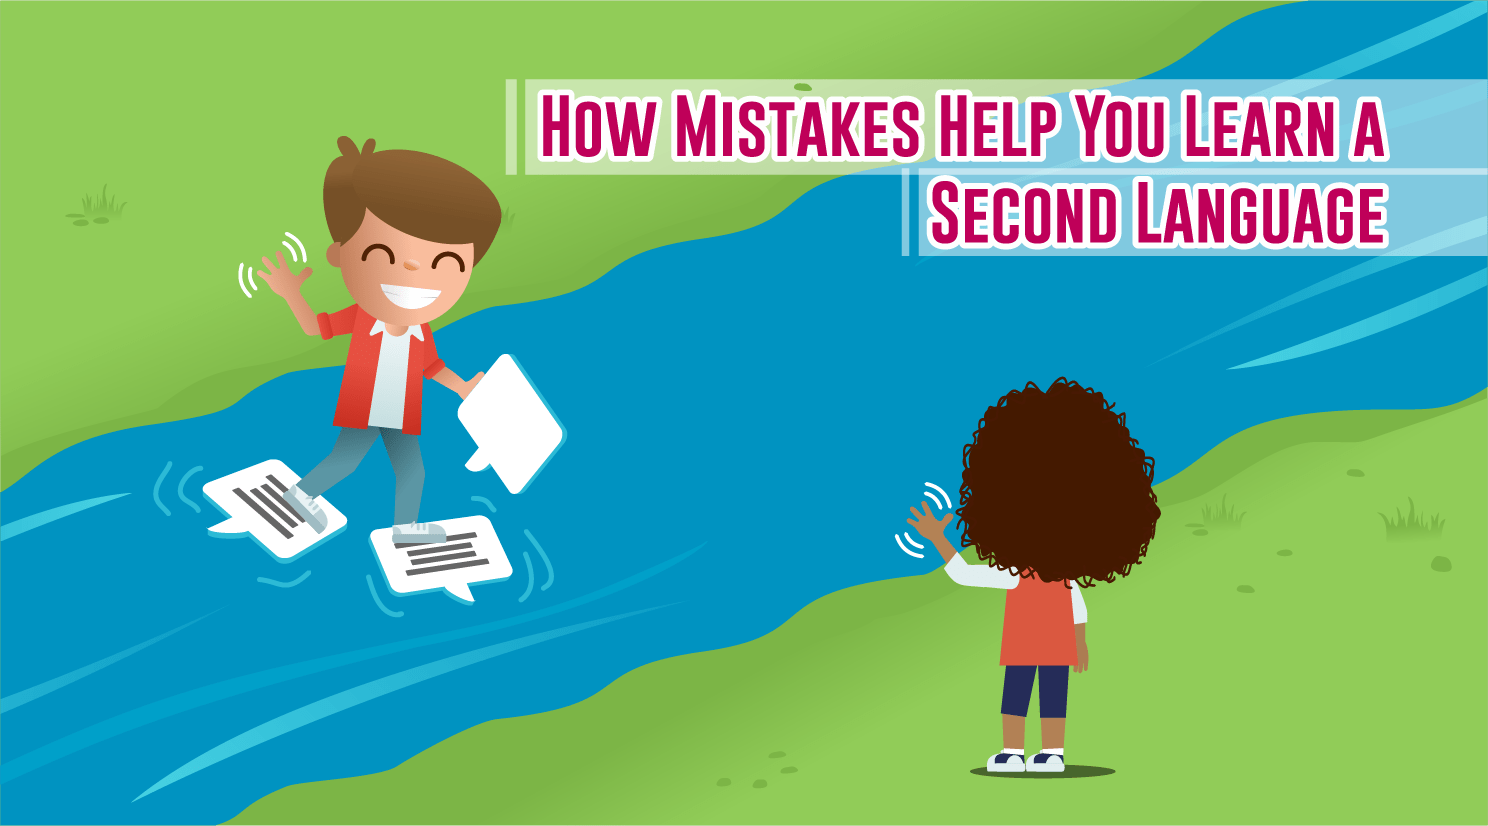 Mistakes Can Make You Better: Learn From Them